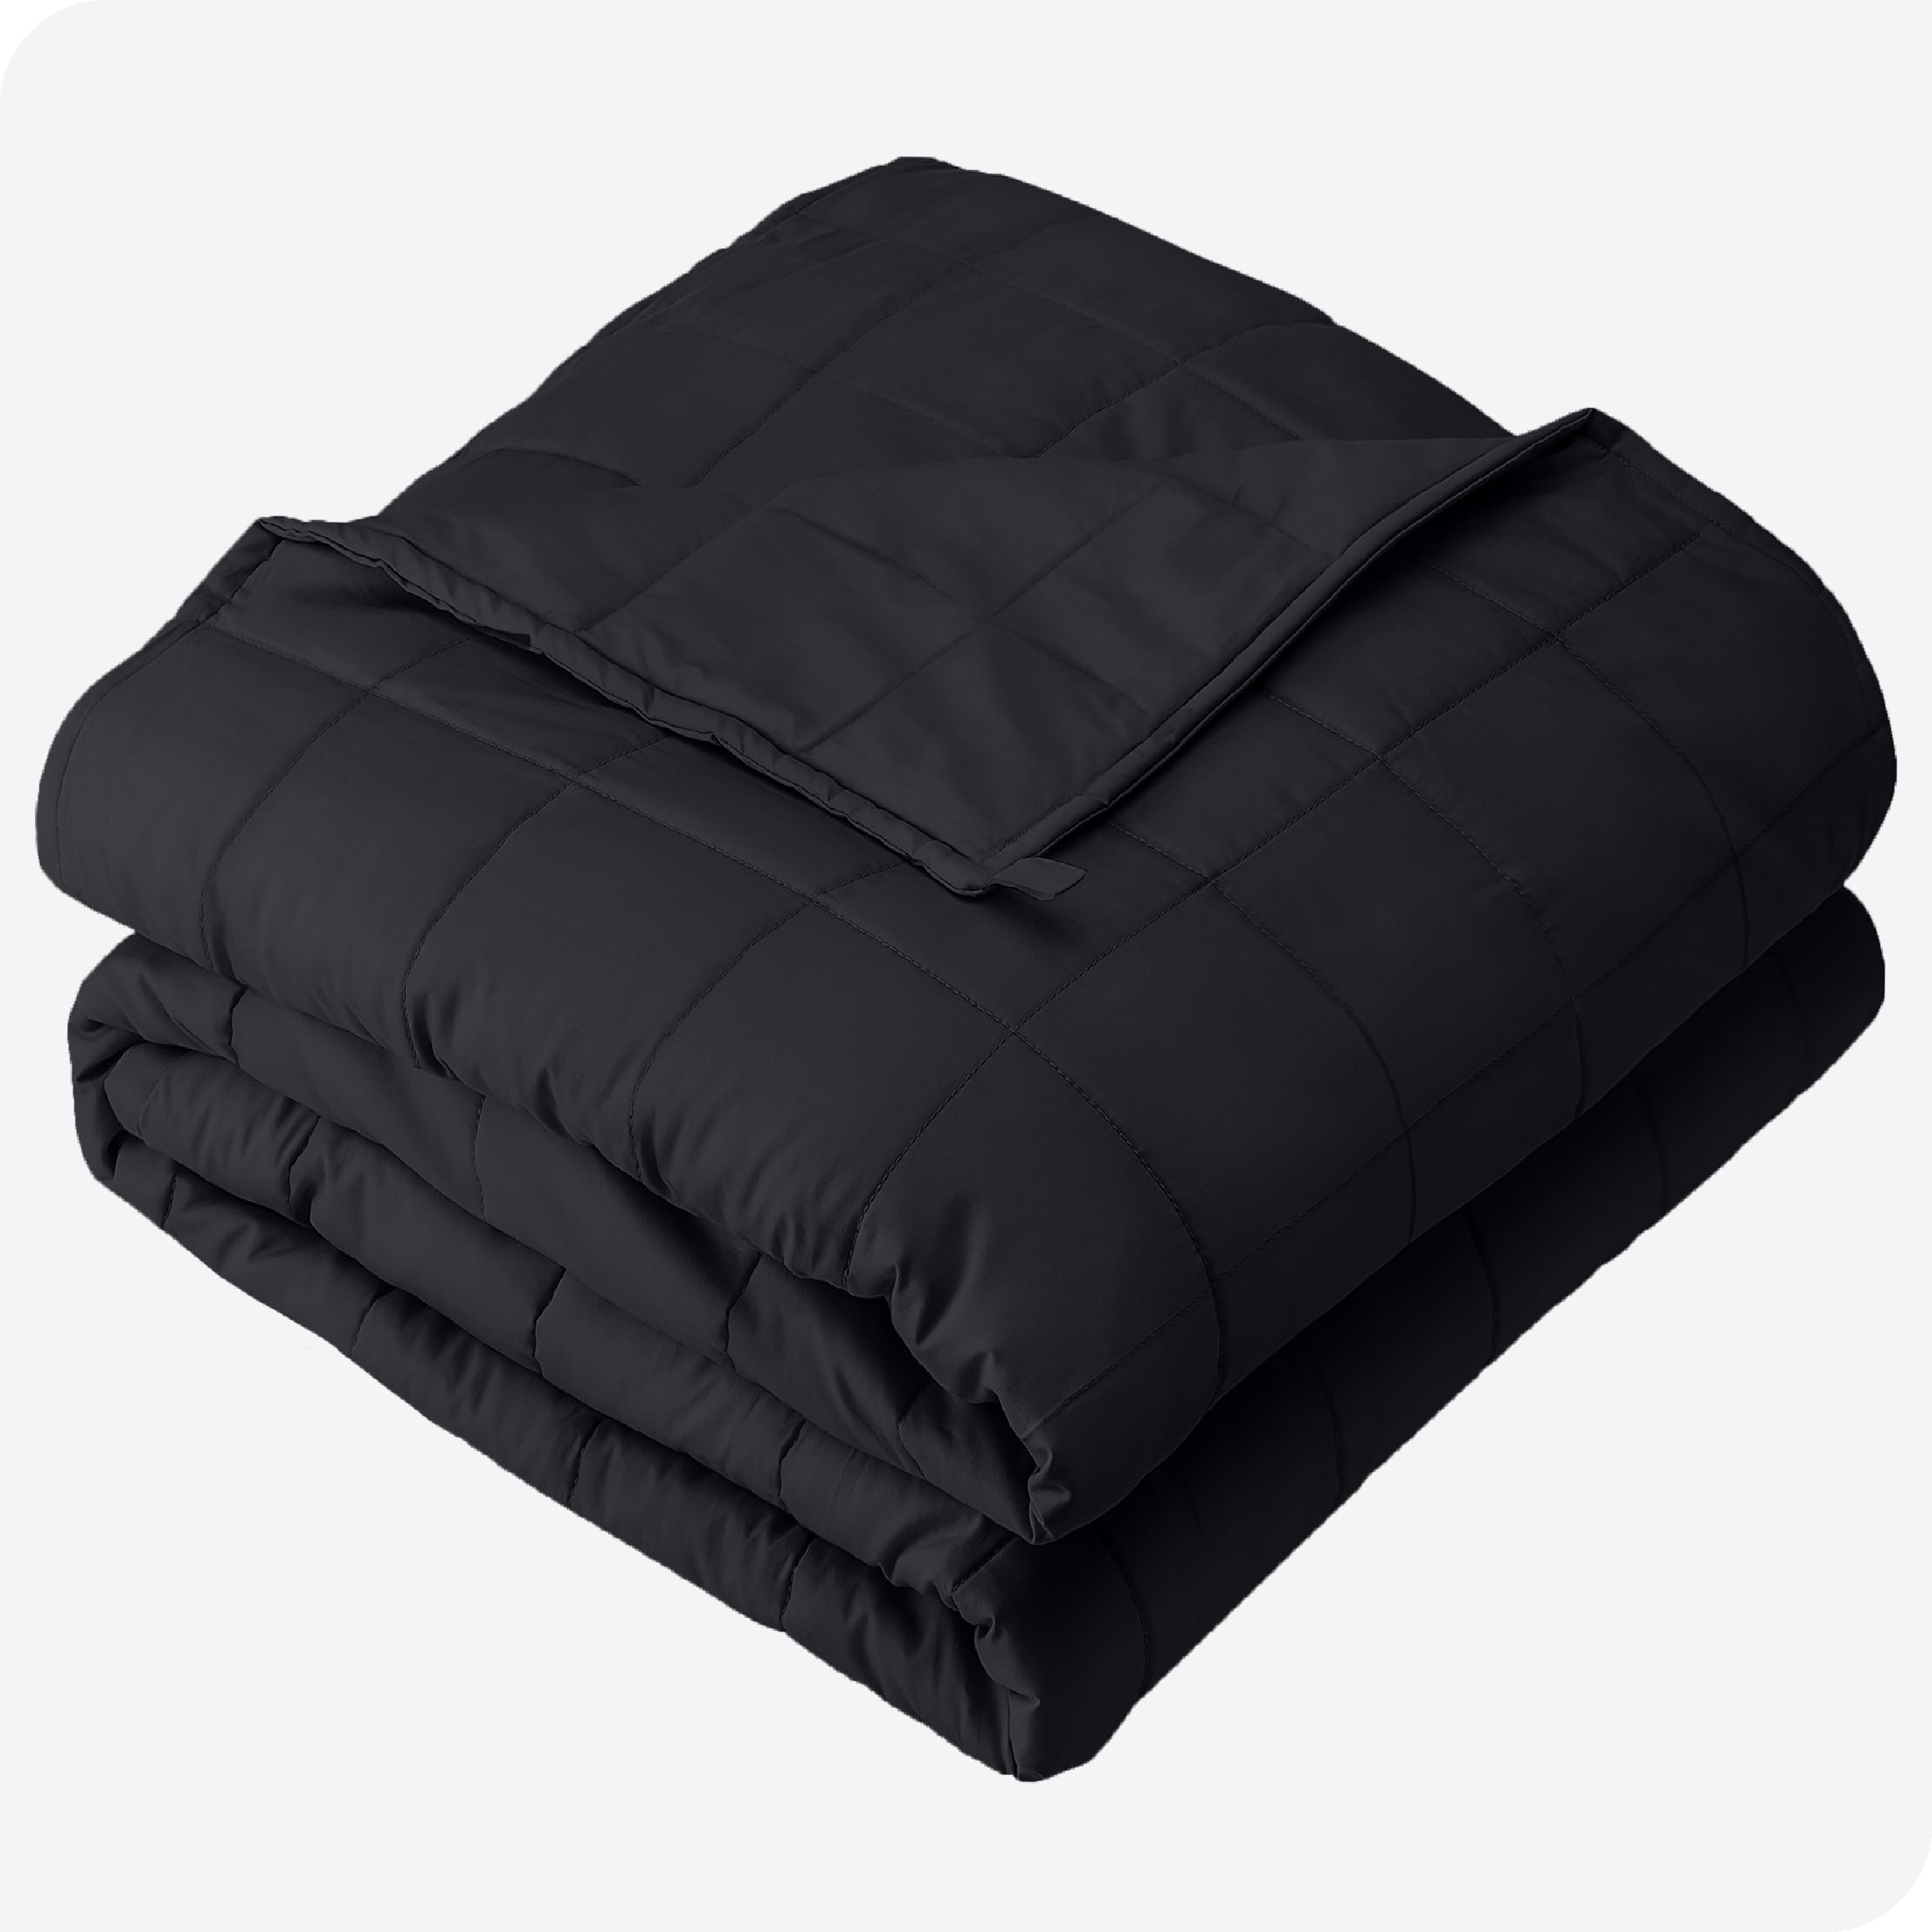 A folded cotton weighted blanket with a white background.